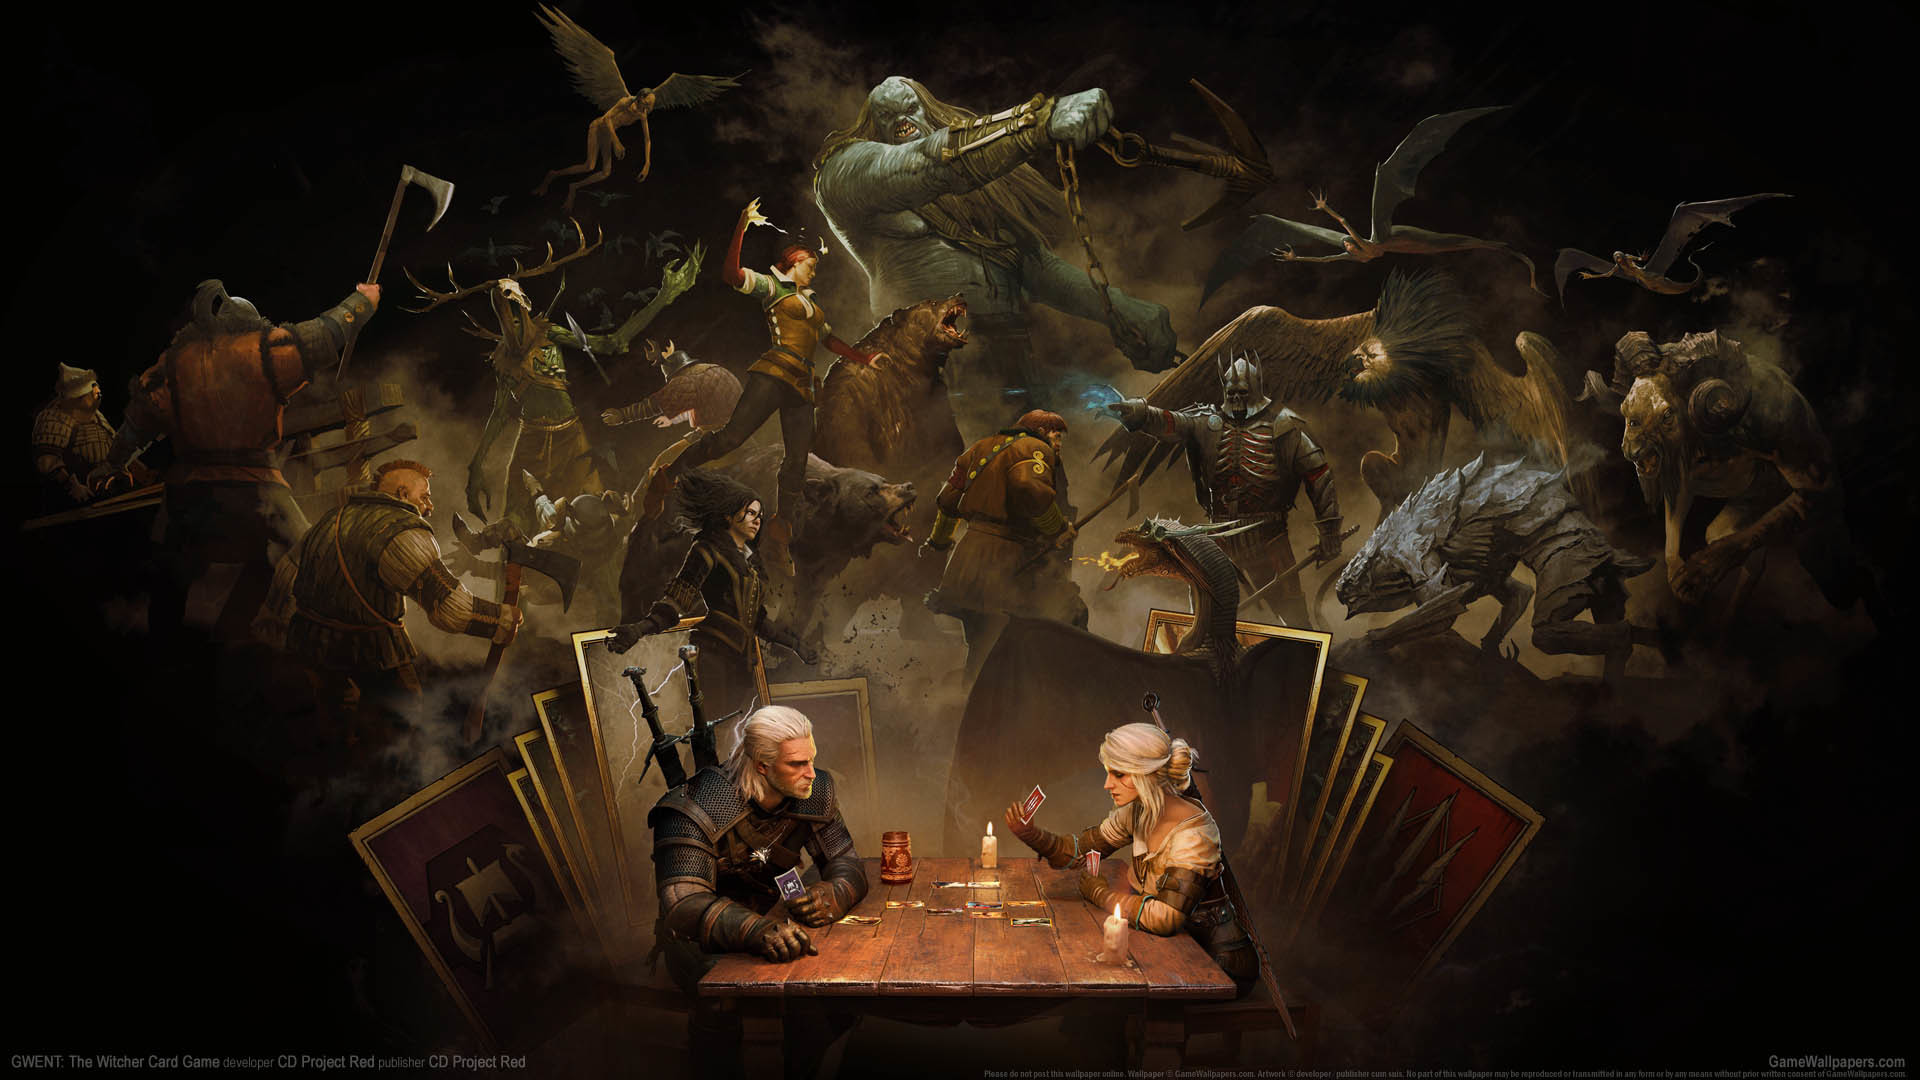 Gwent The Witcher Card Game Mobile - 1920x1080 Wallpaper 